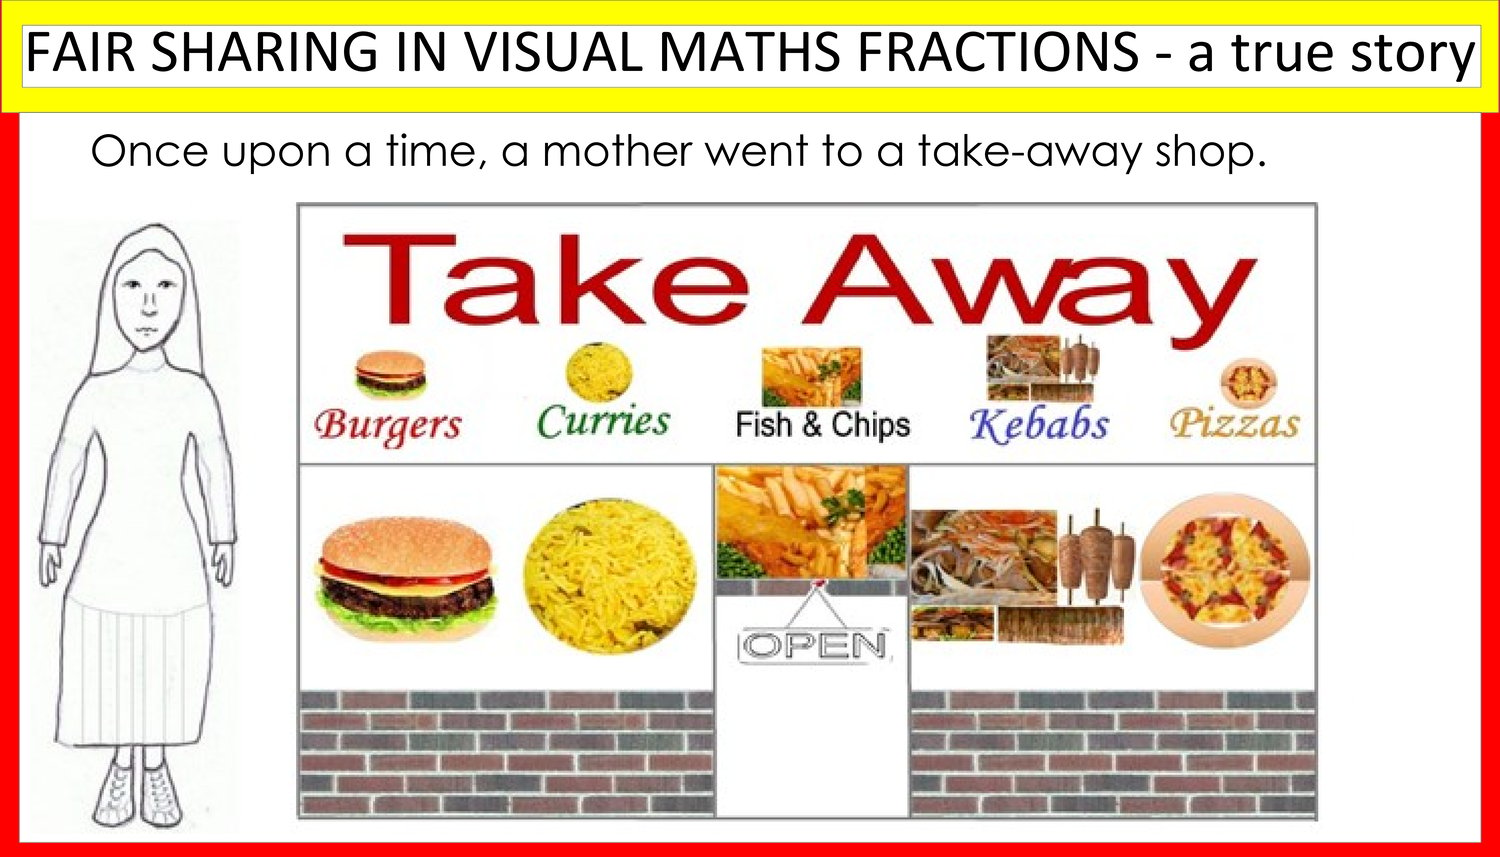 FAIR SHARING In VISUAL MATHS FRACTIONS — A True Story.  For Folks Who Find Text-based Fractions No Fun :-)